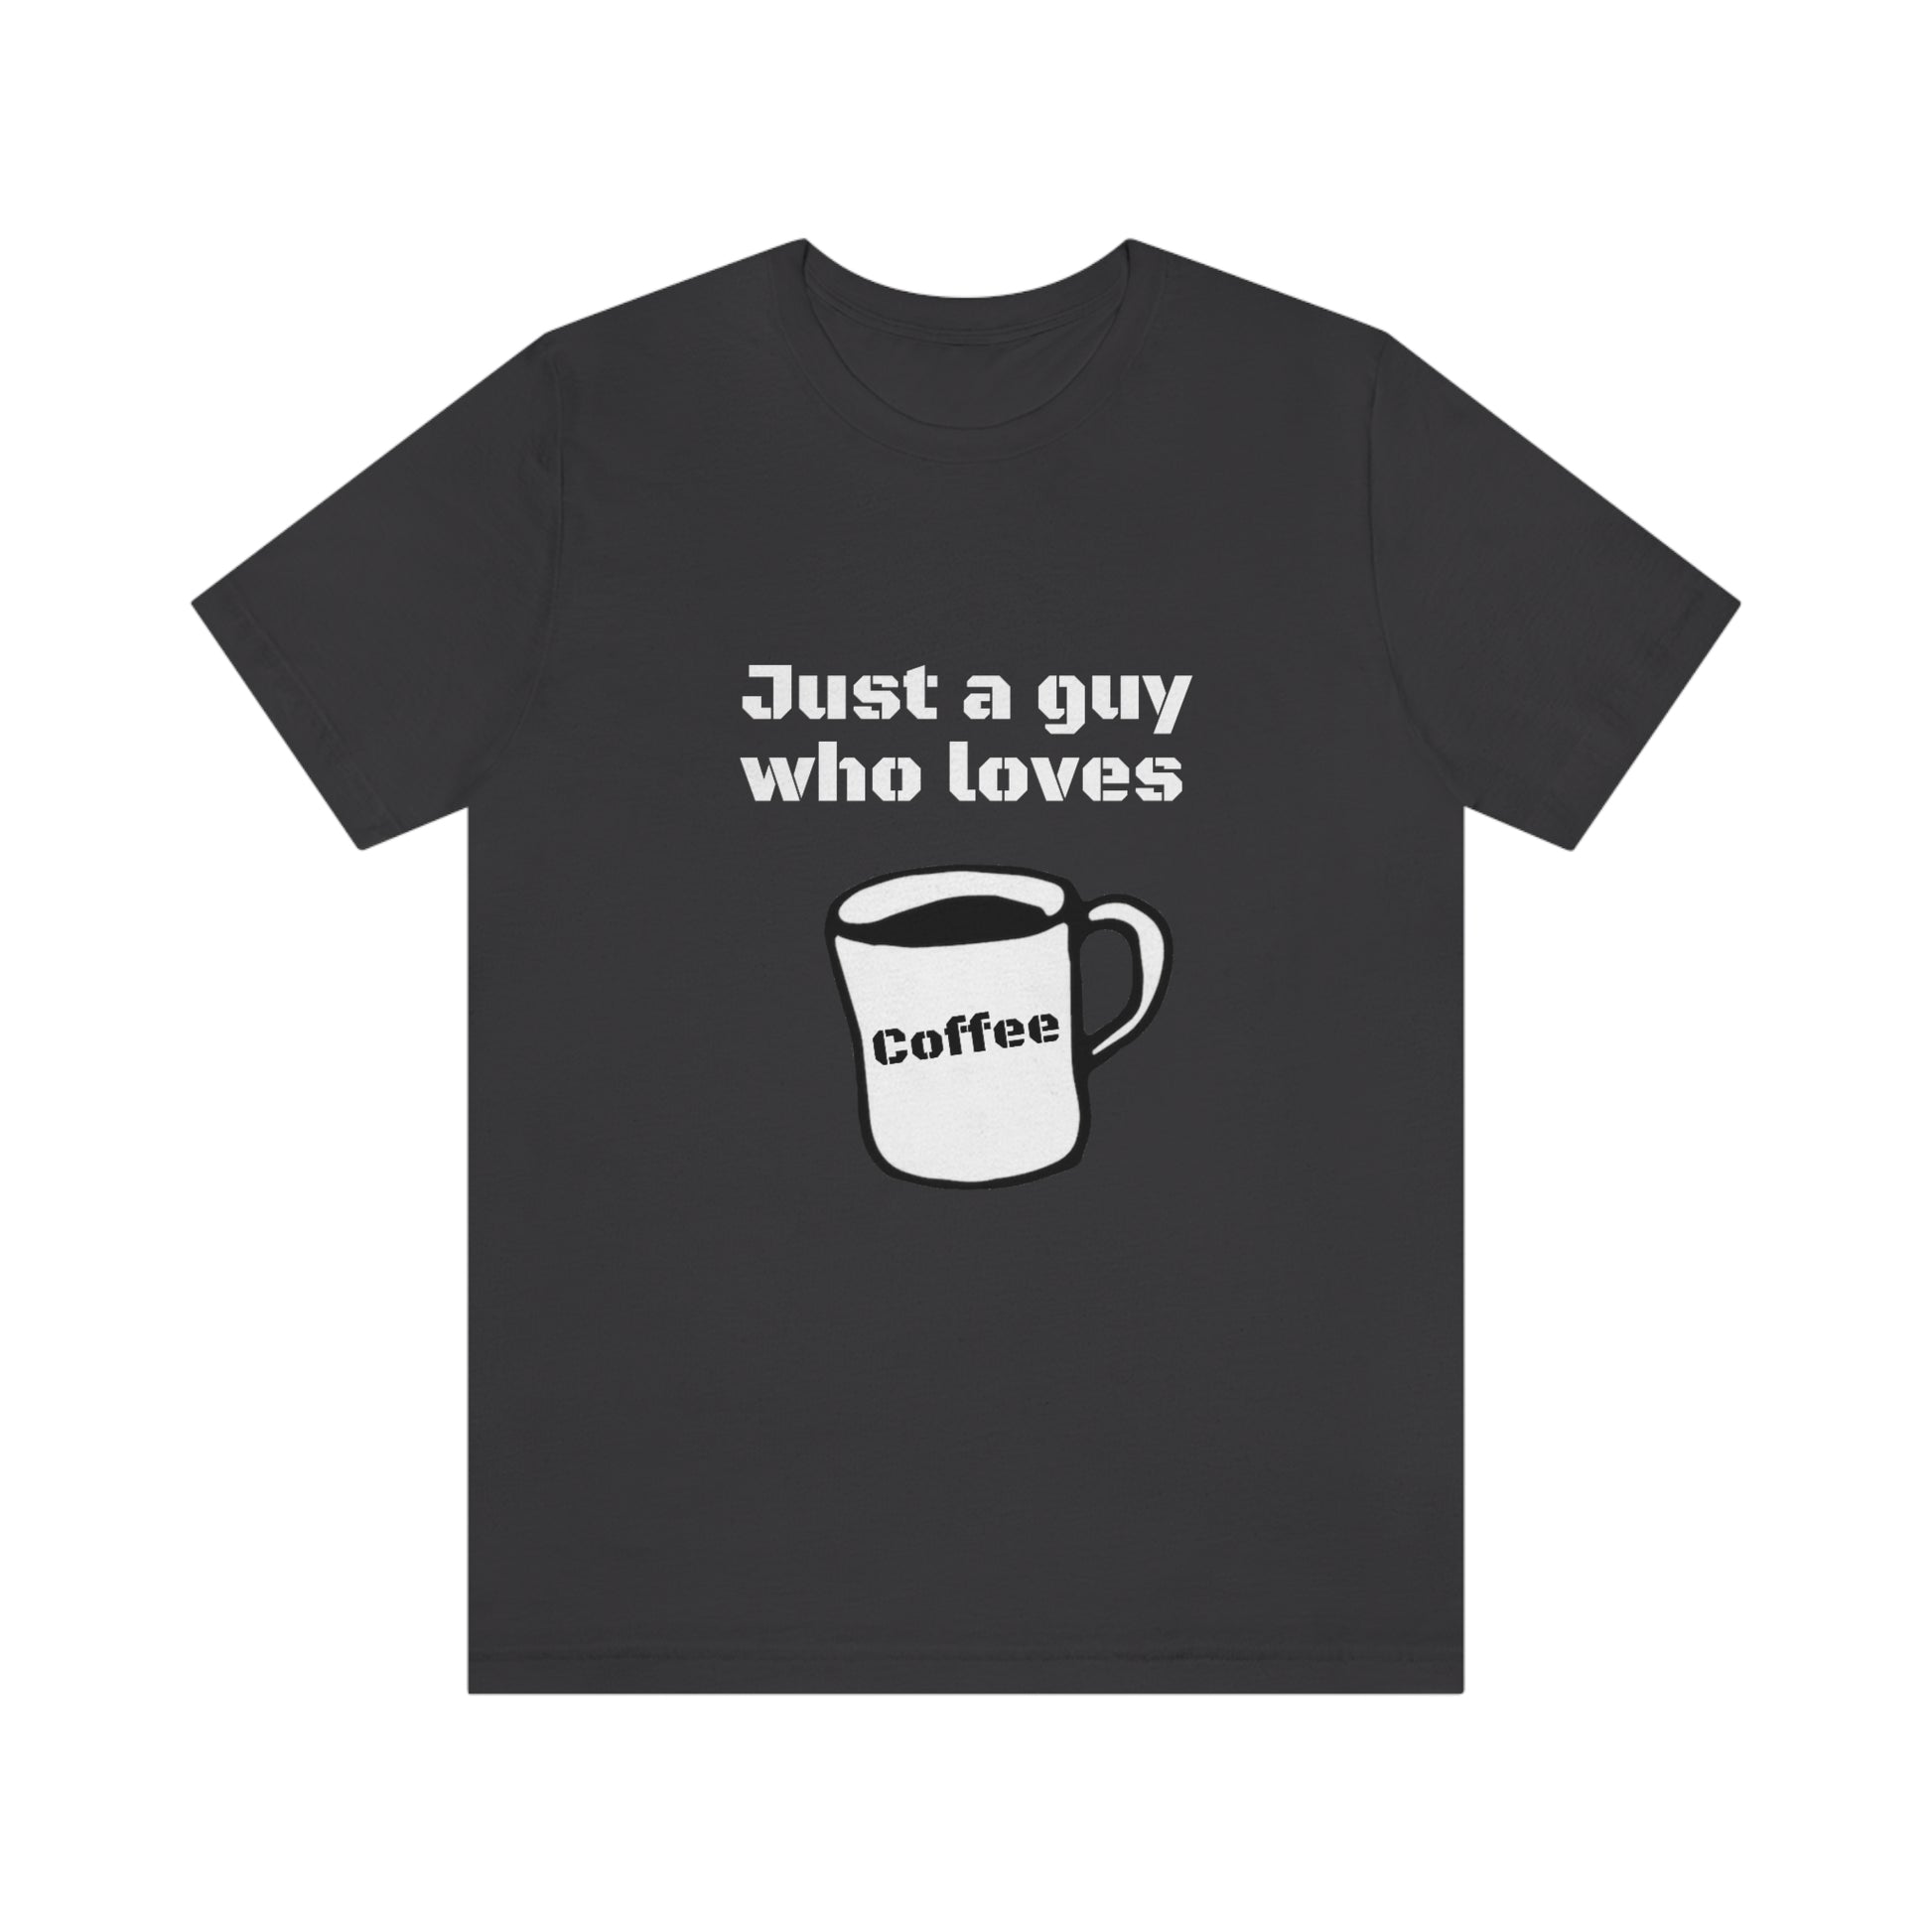 Just a guy who loves Coffee - Funny Designed - Unisex Short Sleeve Tee